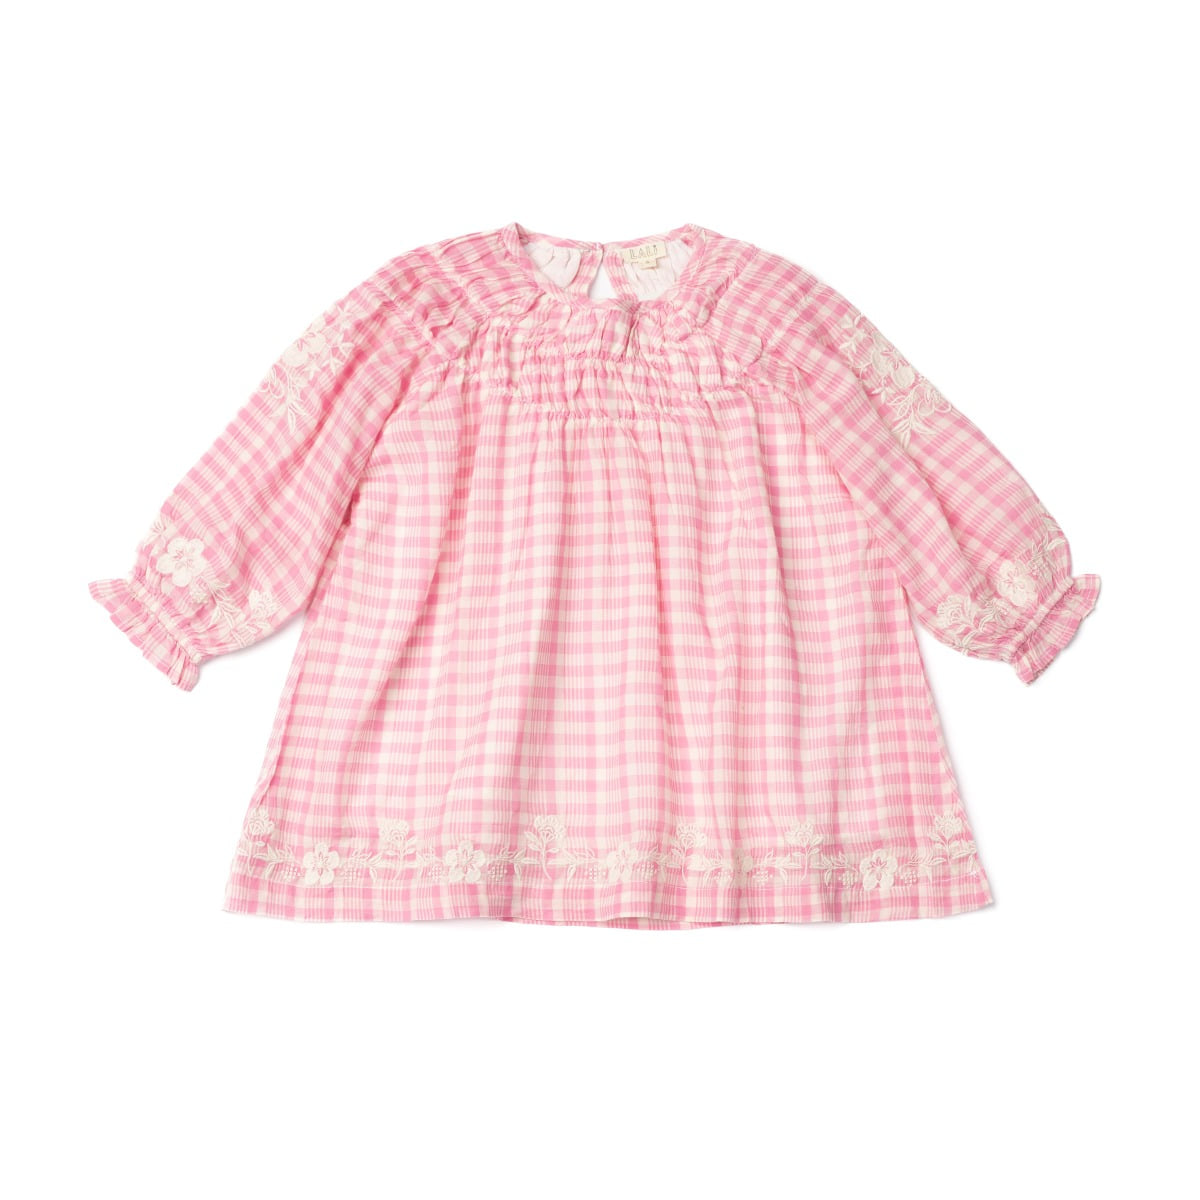 TULIP DRESS(PINK PICNIC PLAID WITH EMBROIDERY)